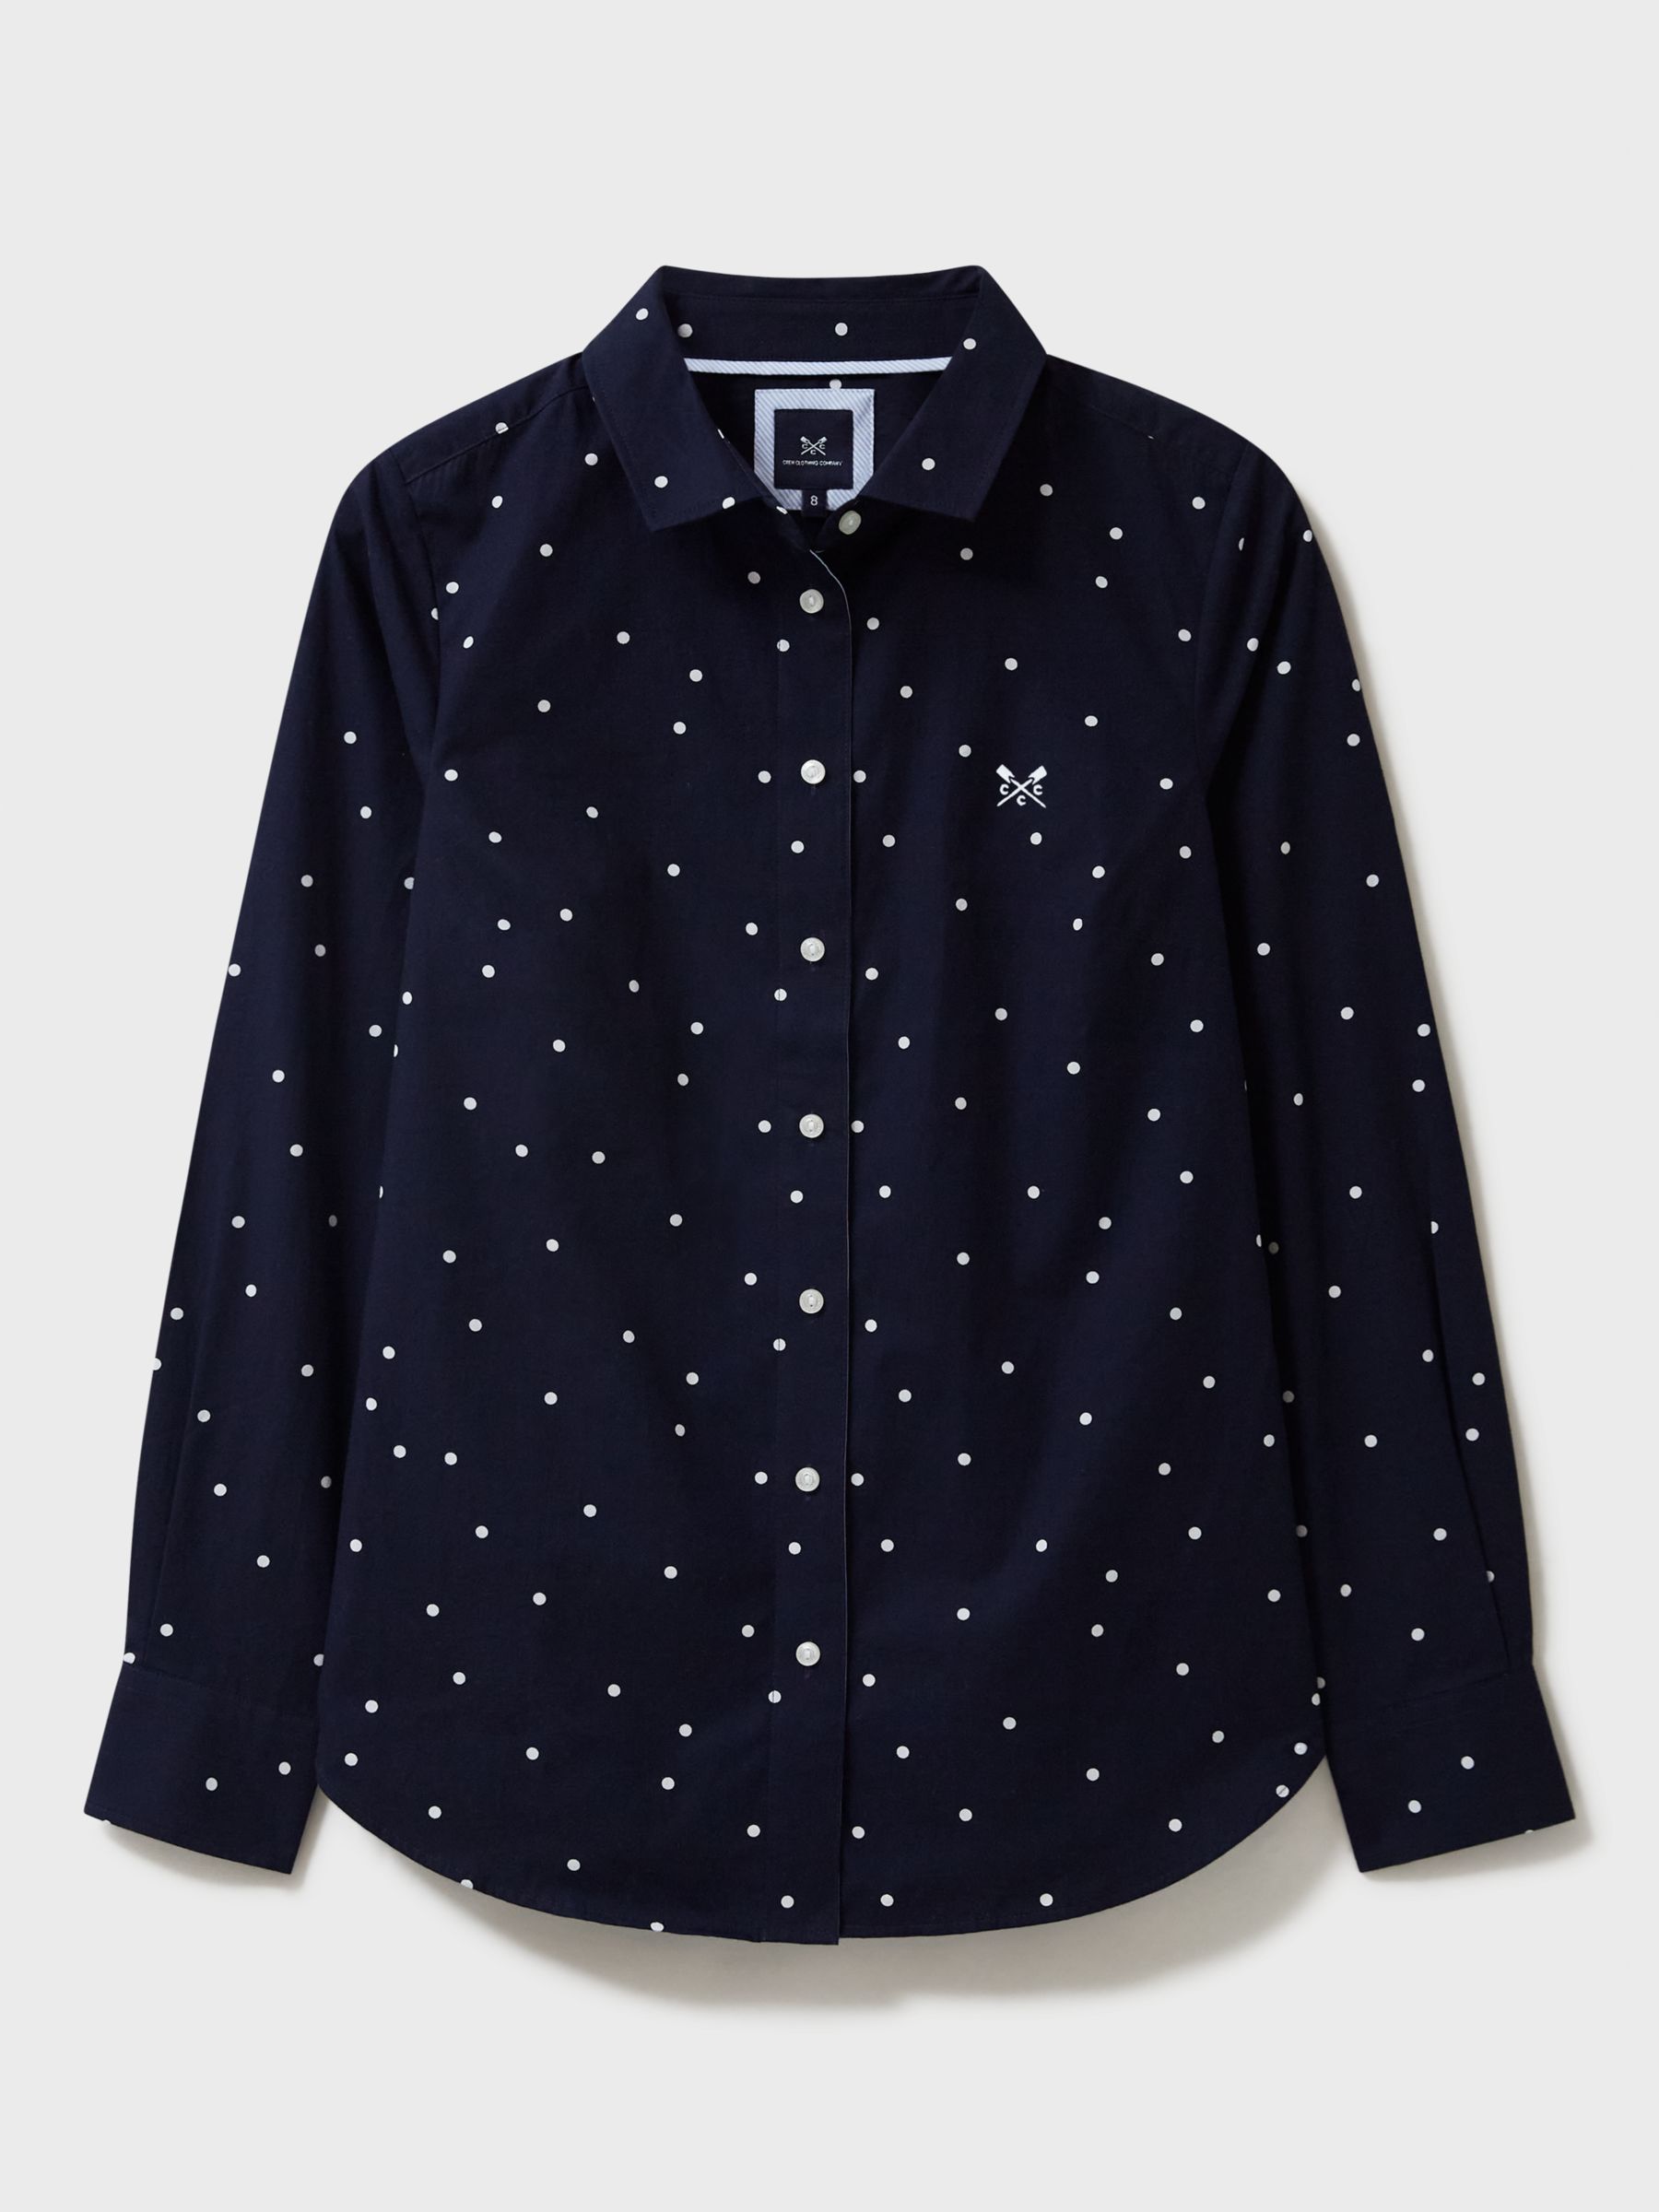 Buy Crew Clothing Lulworth Spot Tailored Shirt, Navy Blue Online at johnlewis.com